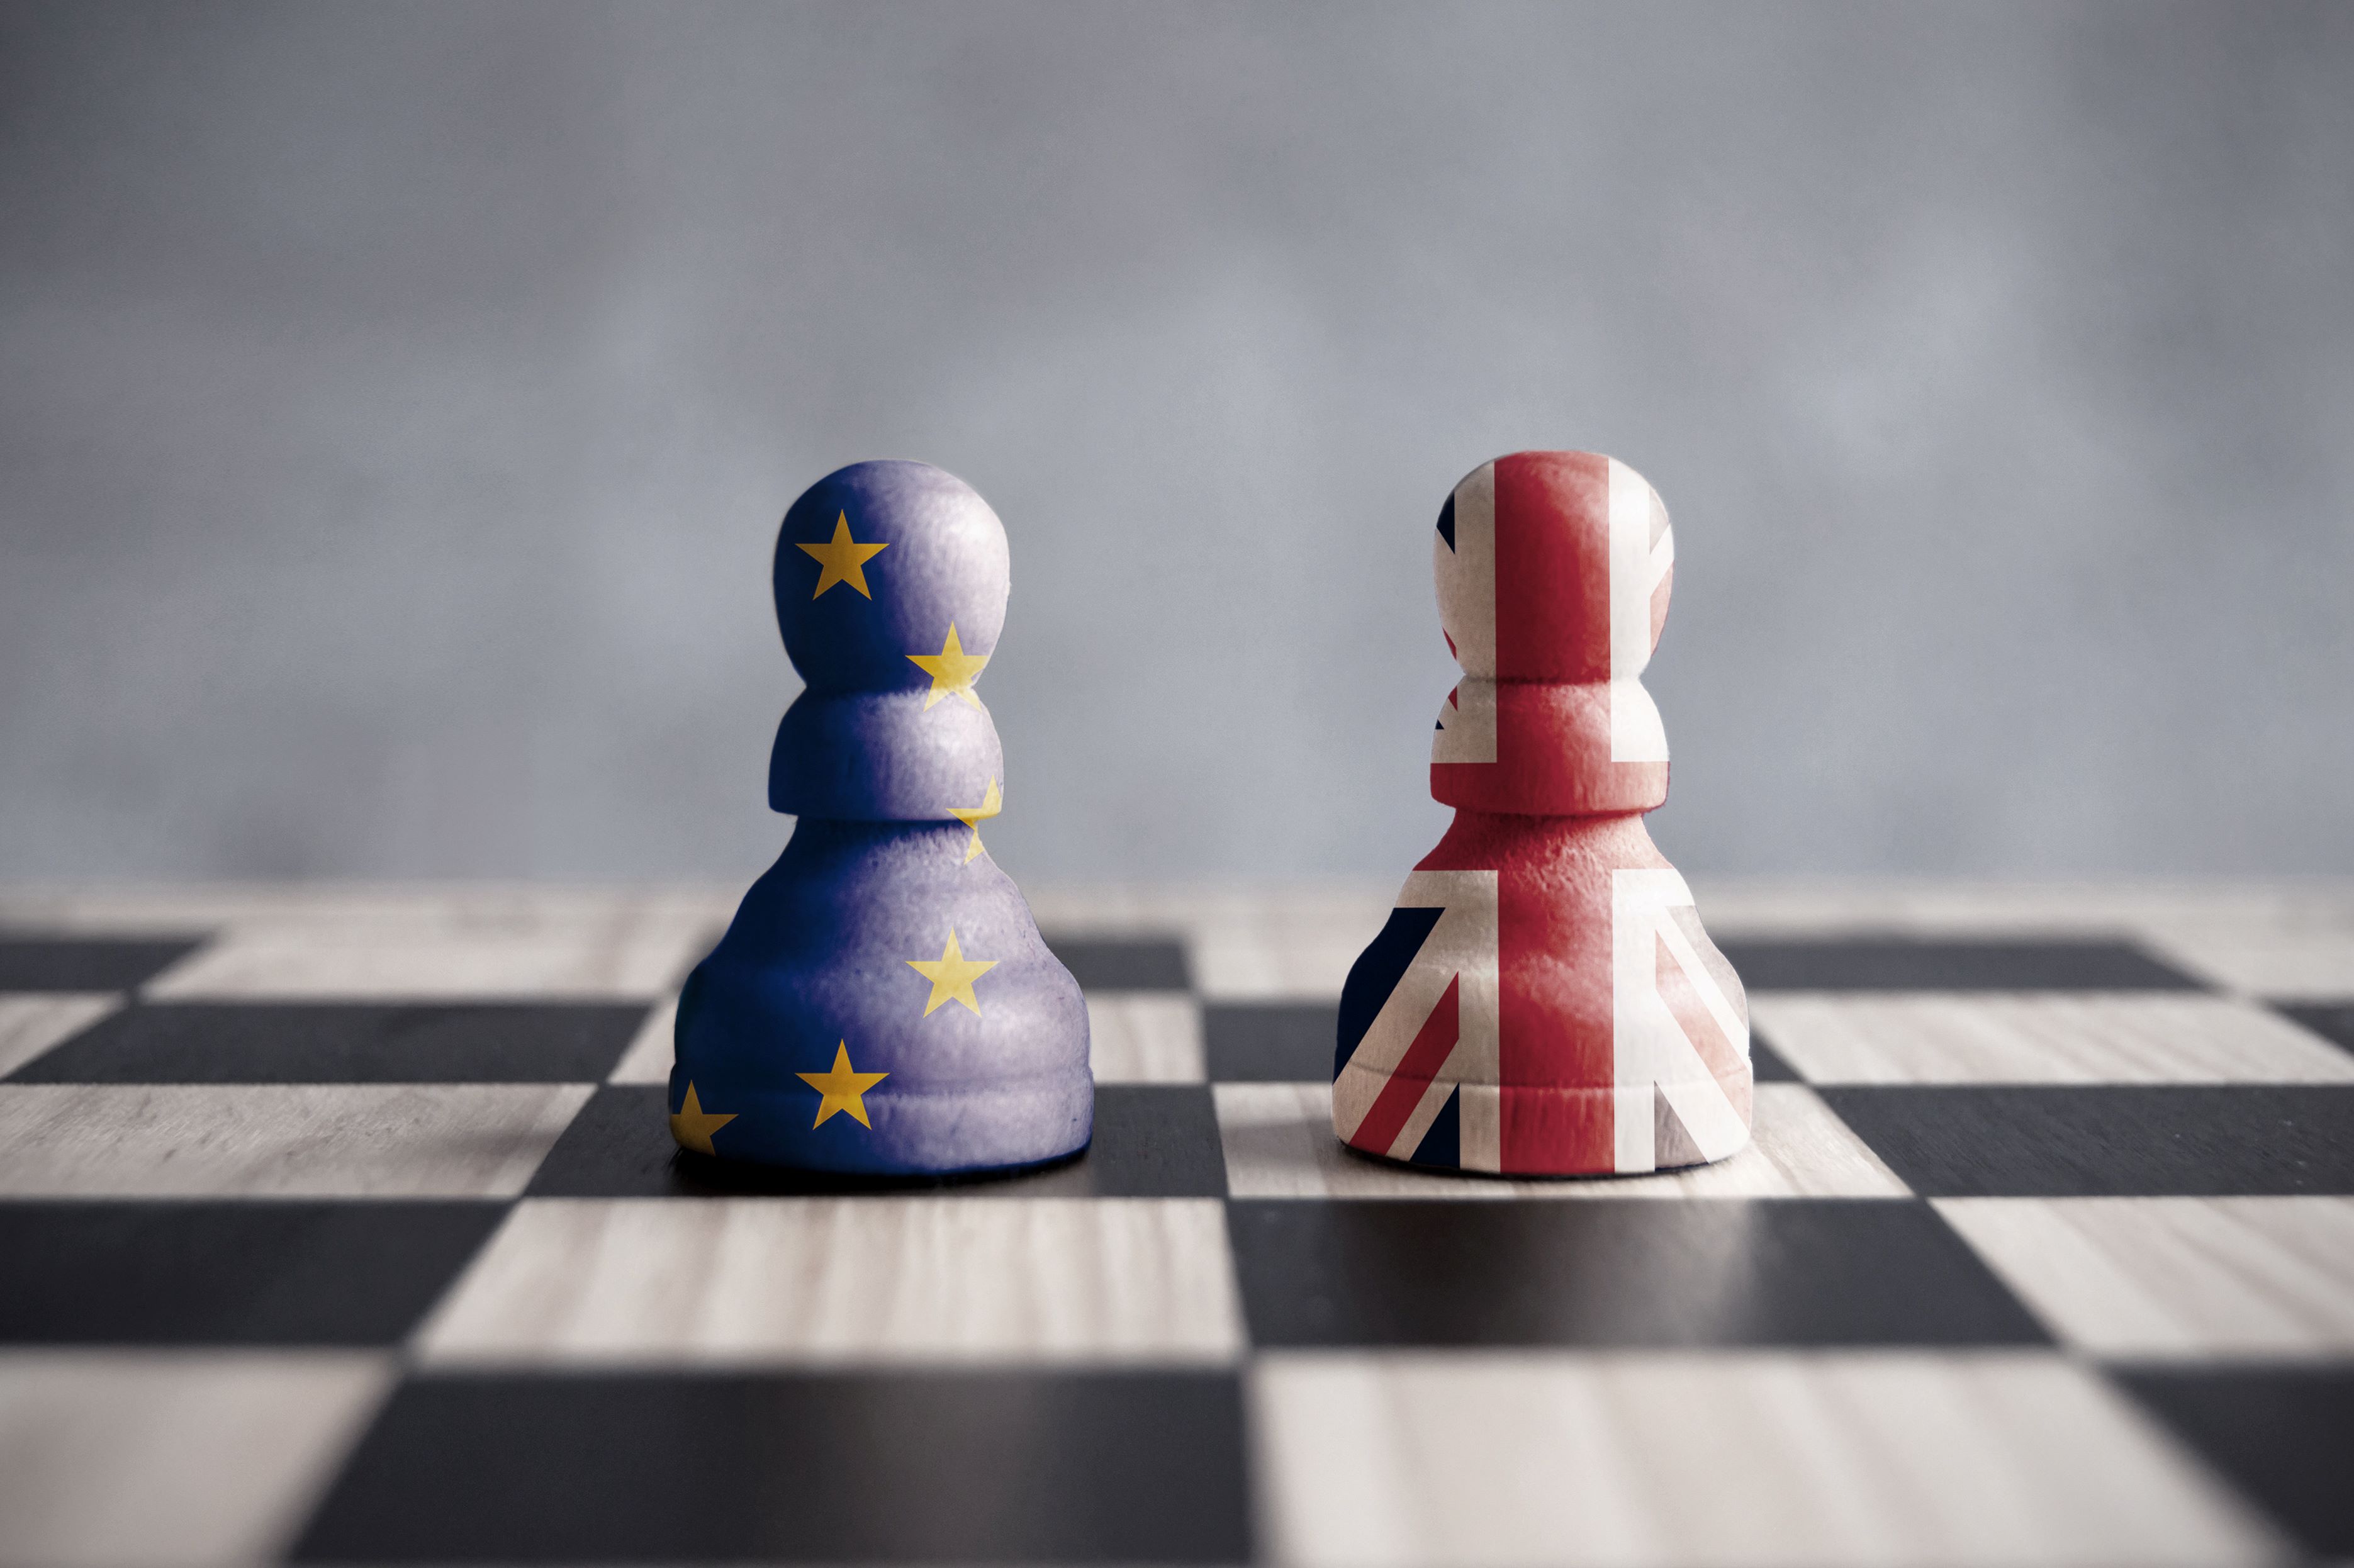 Chess pieces facing each other on board, with UK and EU flags